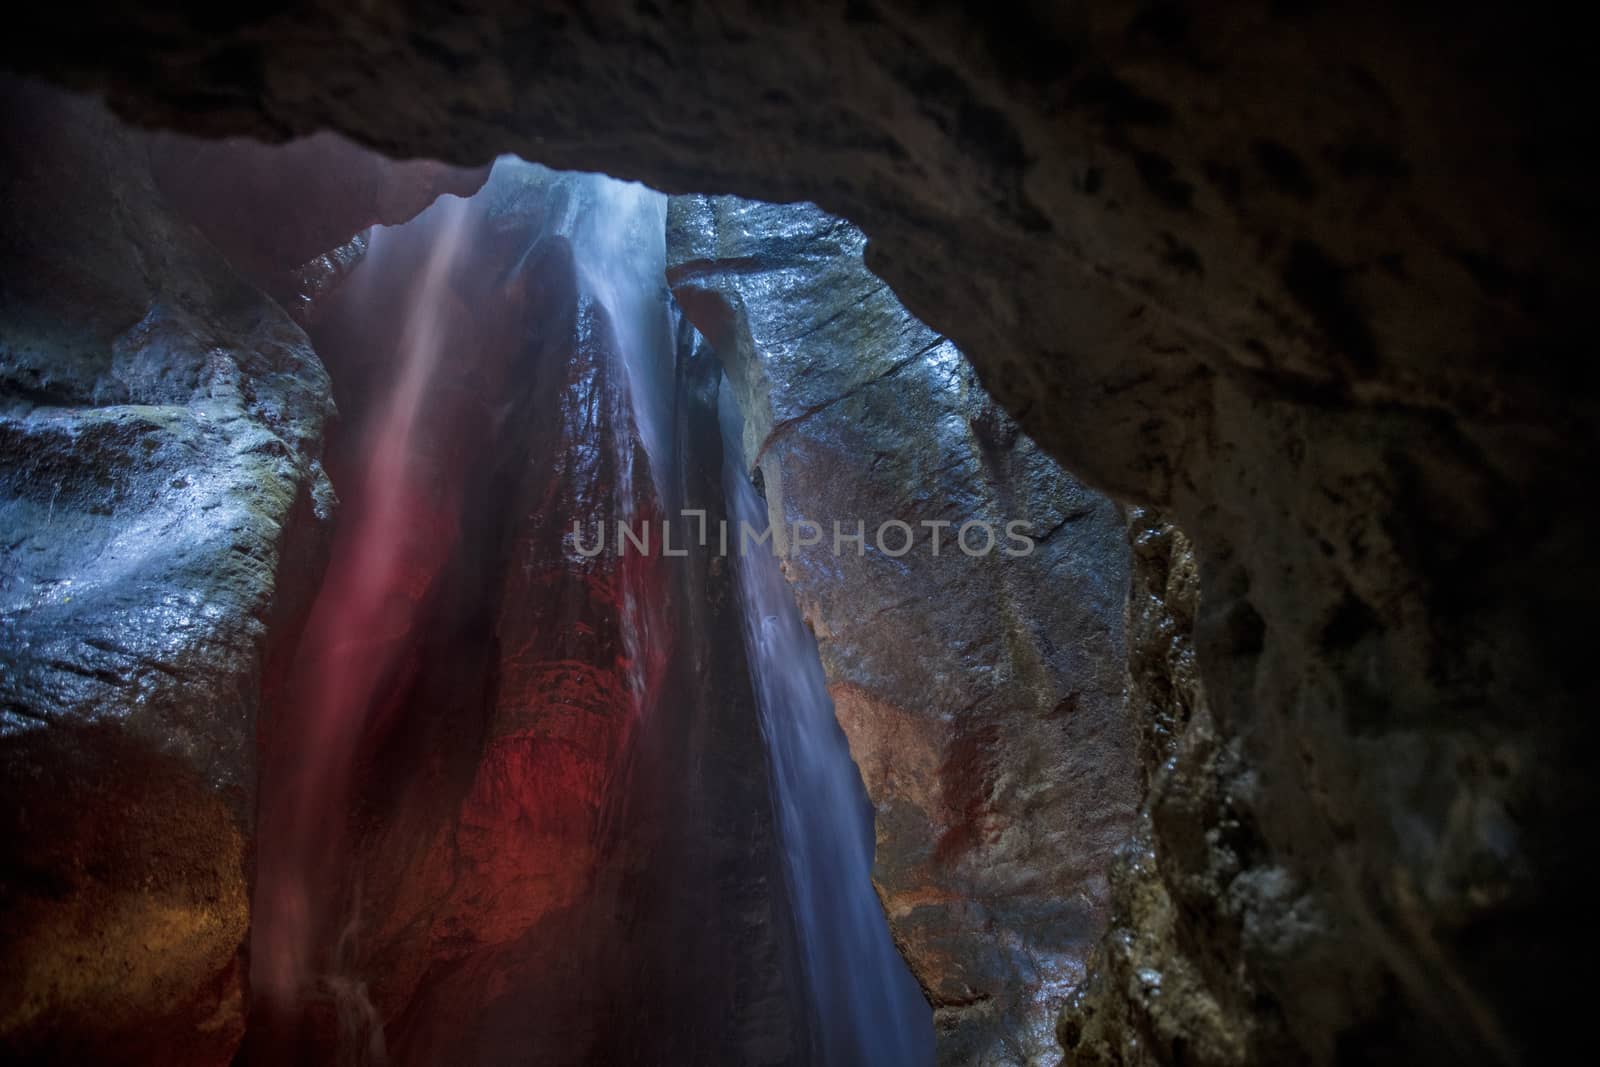 Varone, Lake Garda, Italy, Europe, August 2019, a view of the Varone Cascata waterfalls and caverns